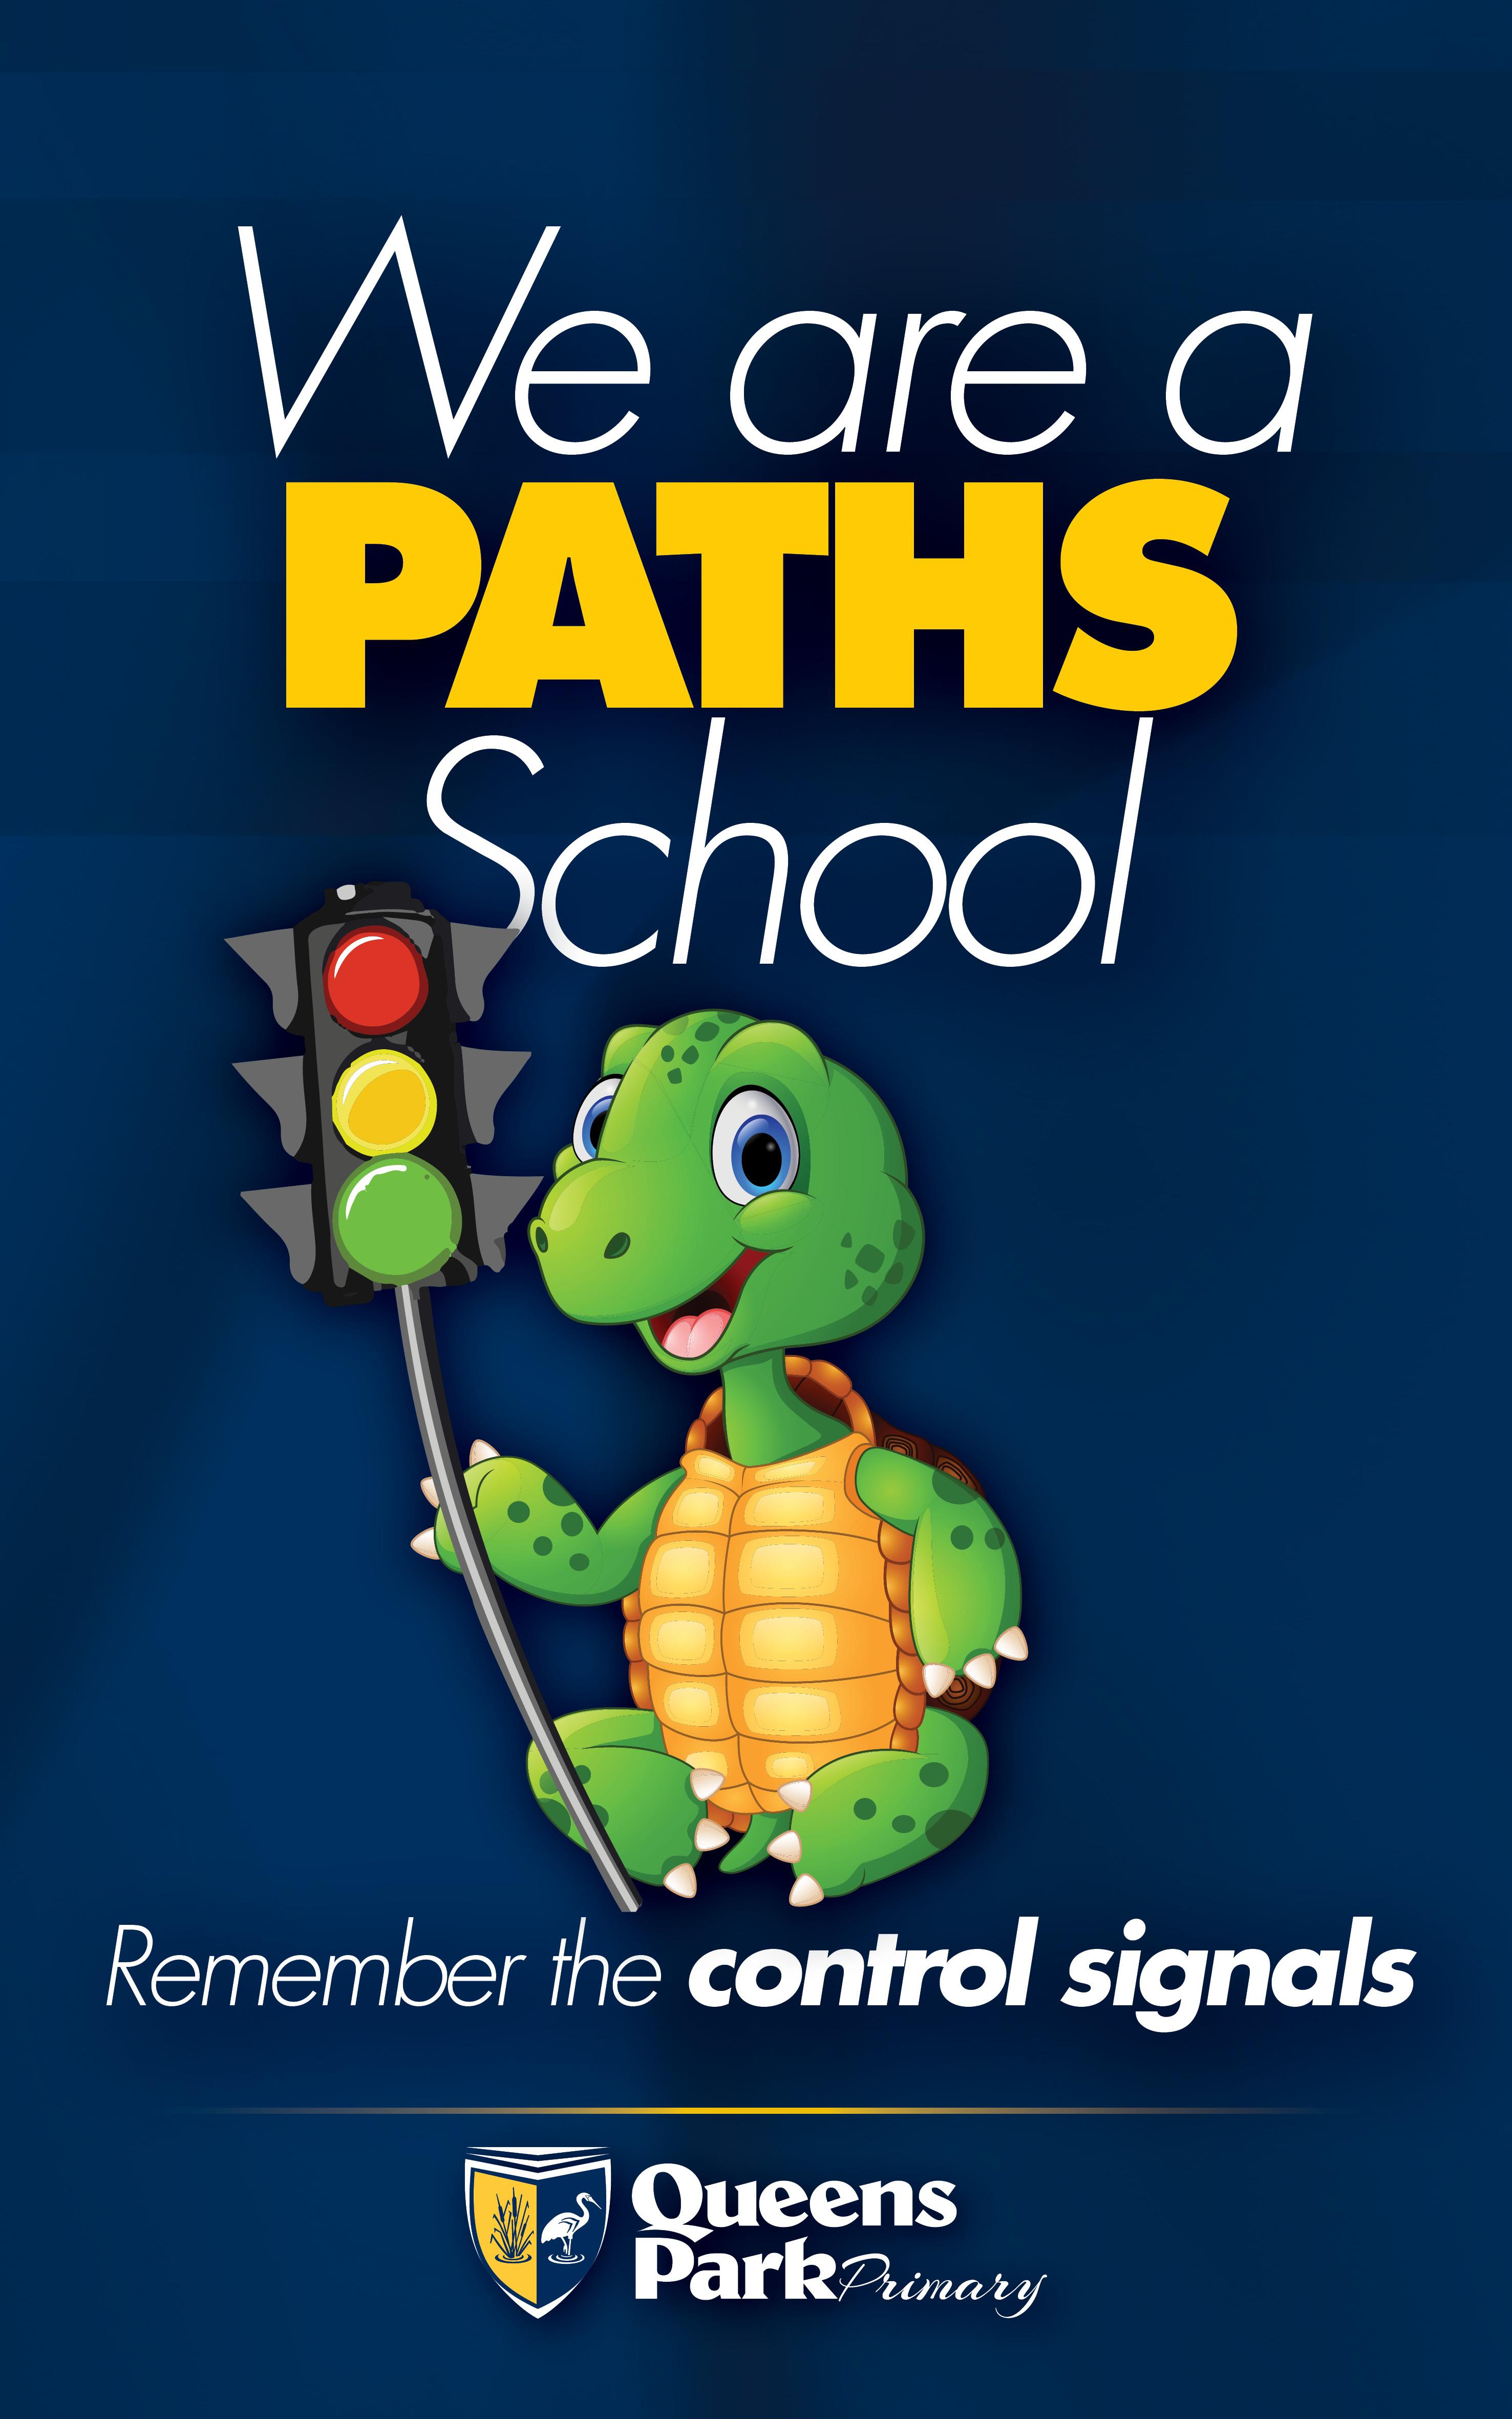 We are a PATHS School